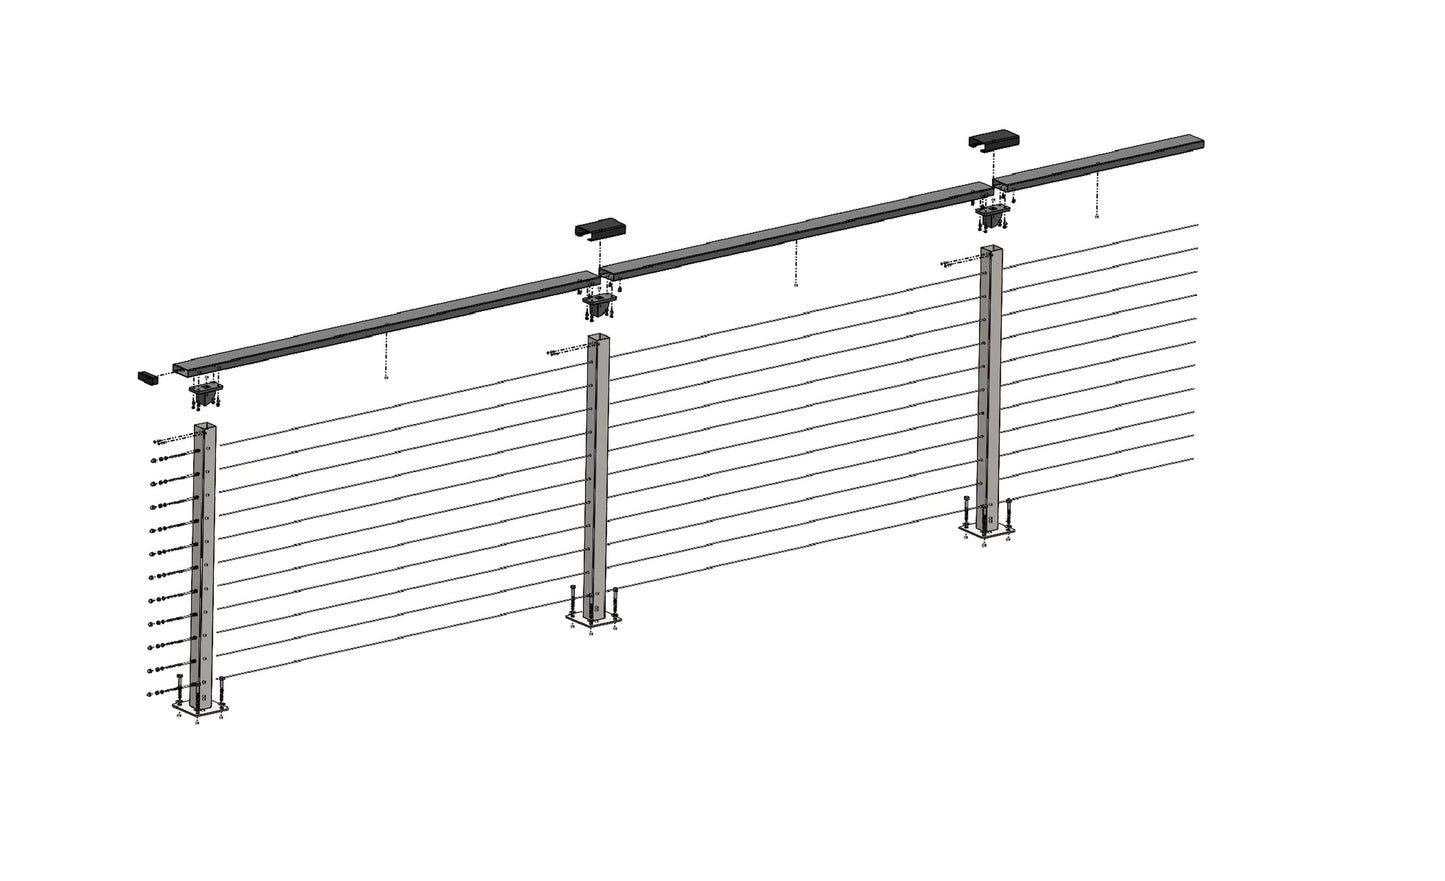 39 ft. x 42 in. Grey Deck Cable Railing, Base Mount , Stainless